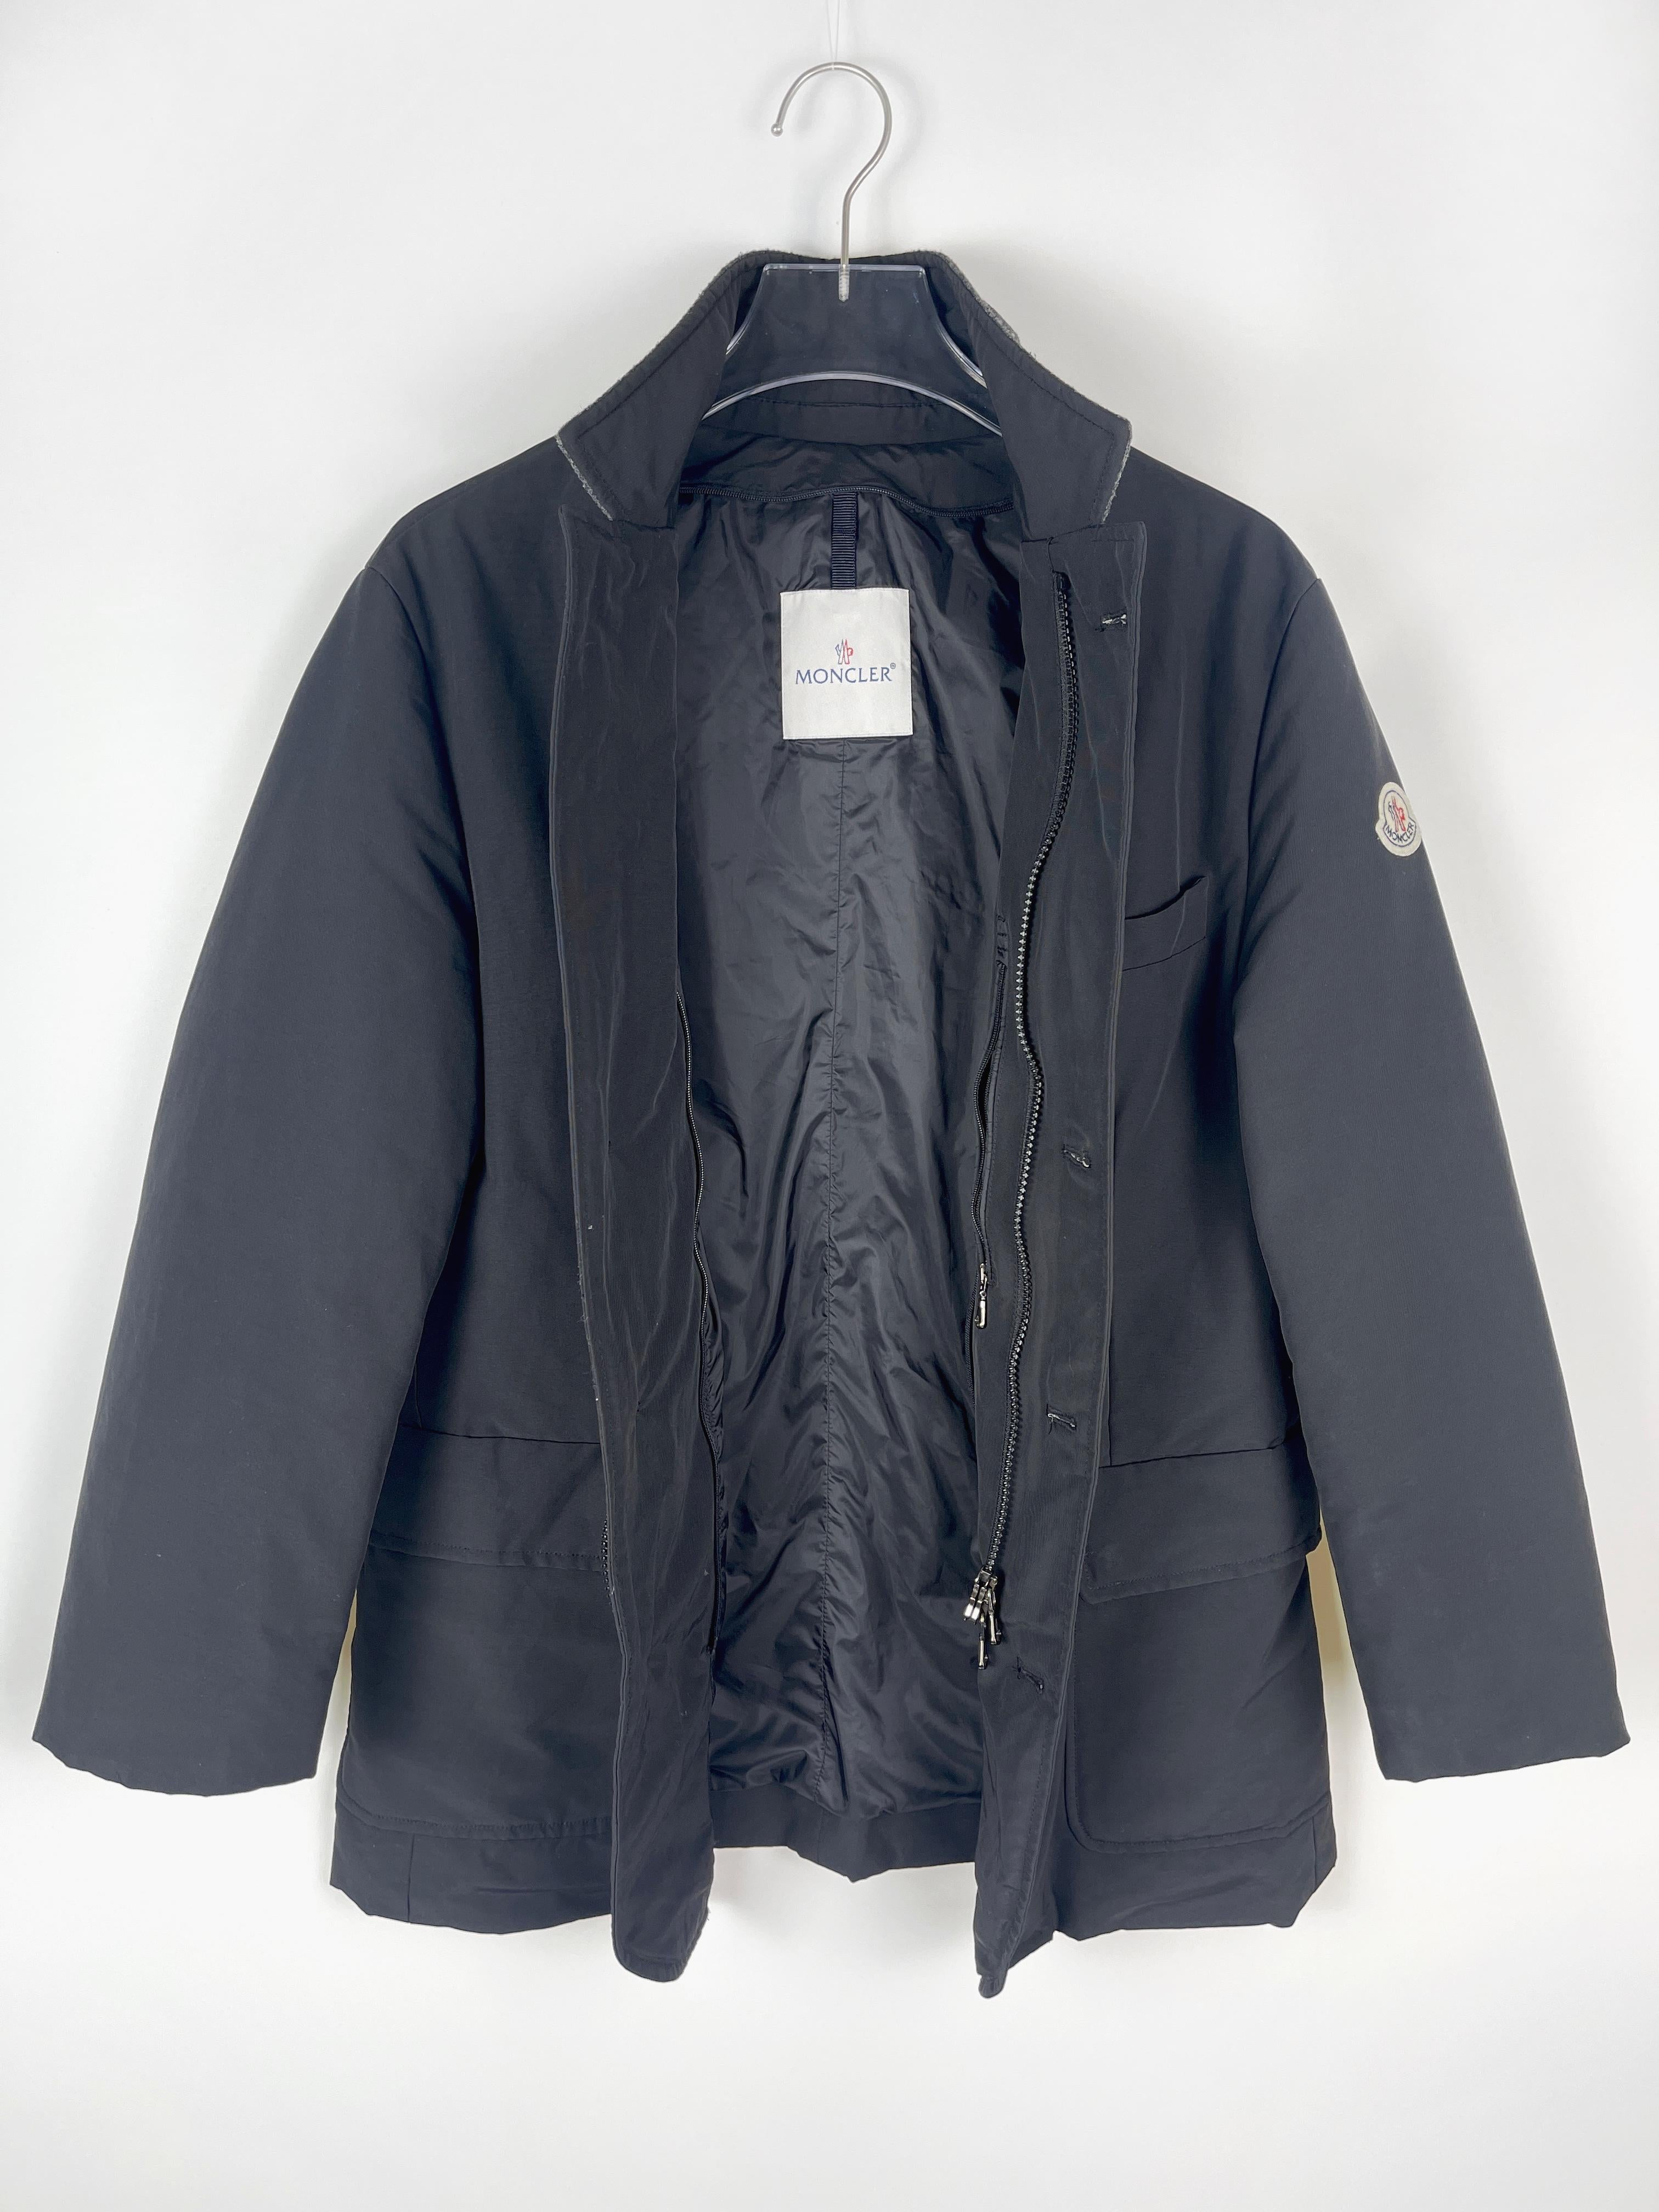 Moncler 2000's Down Parka In Excellent Condition For Sale In Seattle, WA